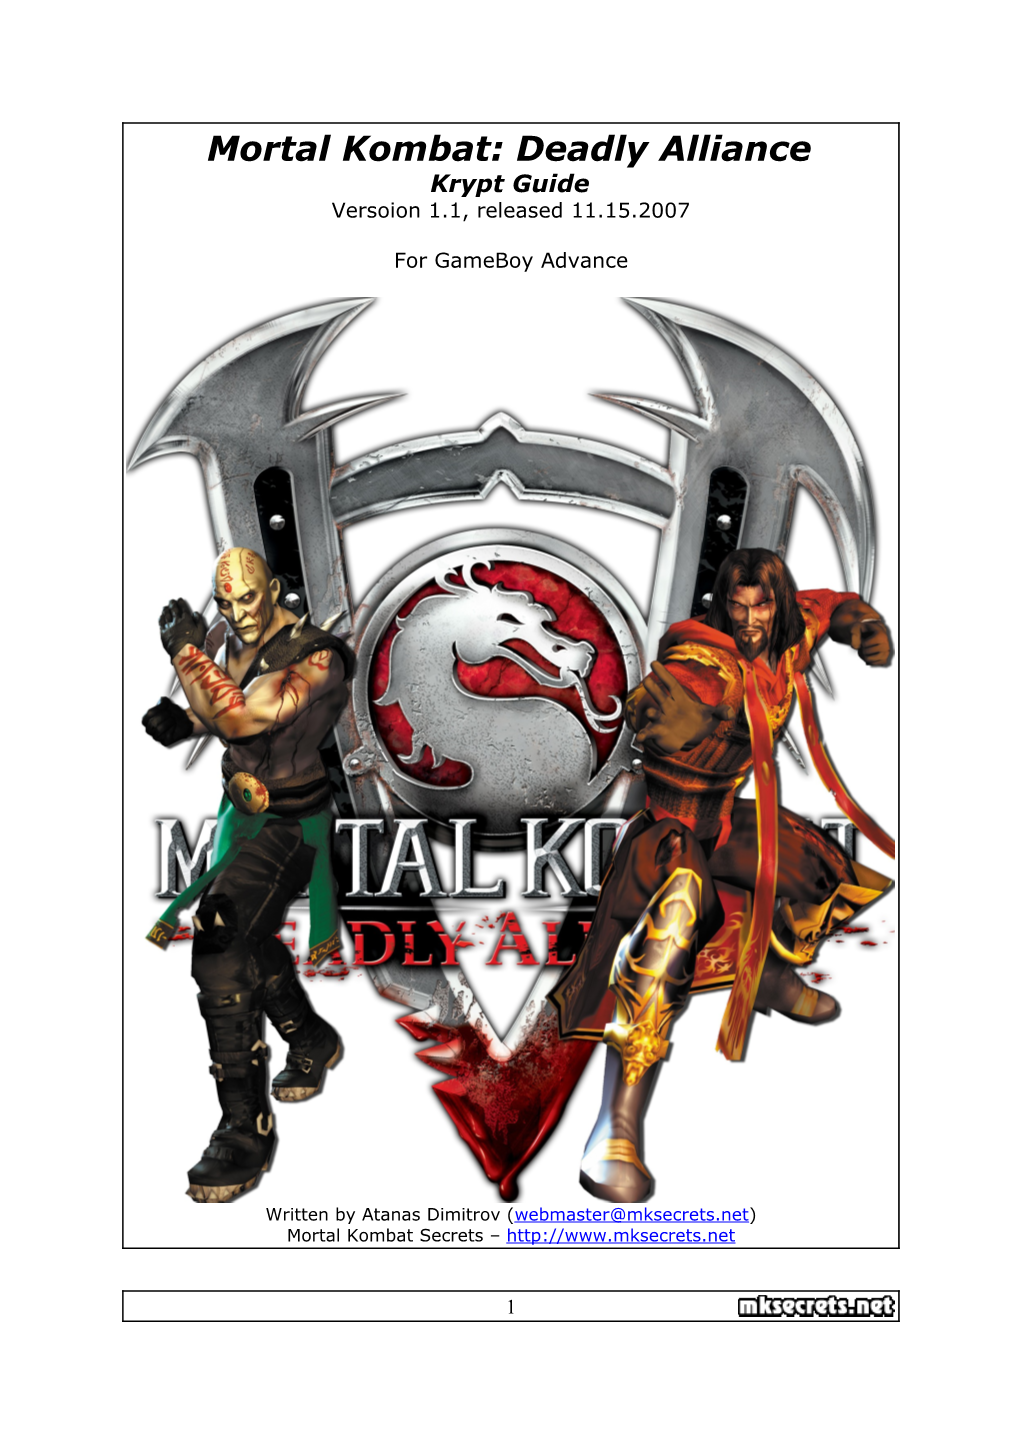 Deadly Alliance Krypt Guide Versoion 1.1, Released 11.15.2007